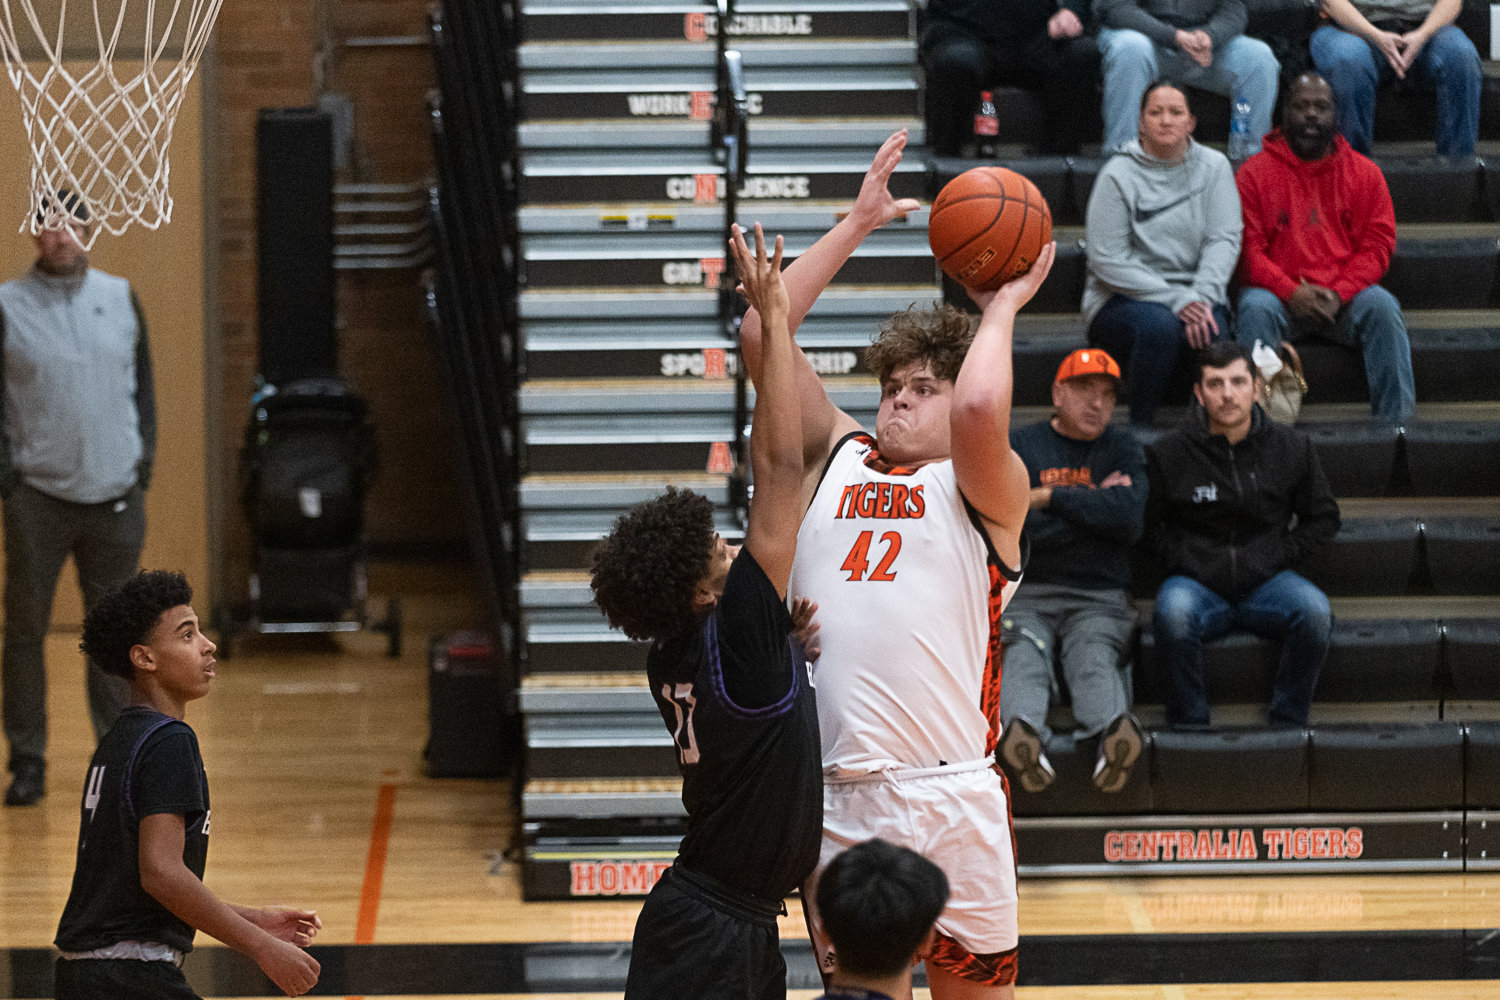 David Daarud puts up a shot in the post during Centralia's 56-34 loss to Heritage on Dec. 2.